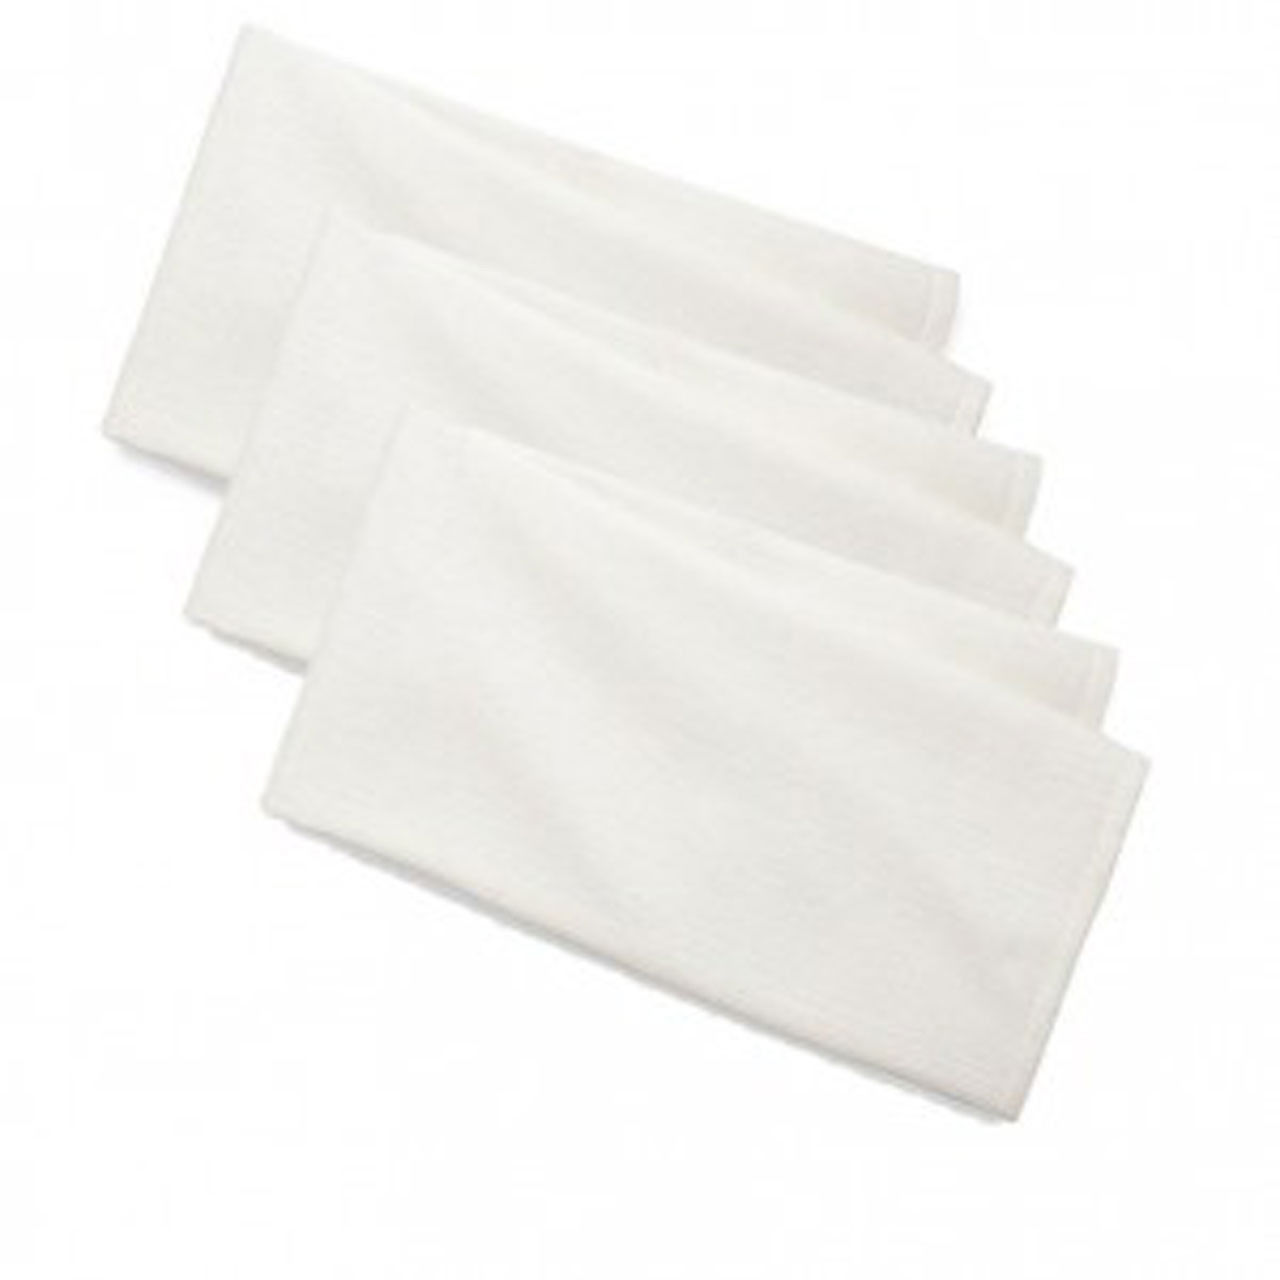 What are the features of the White Huck Towels?